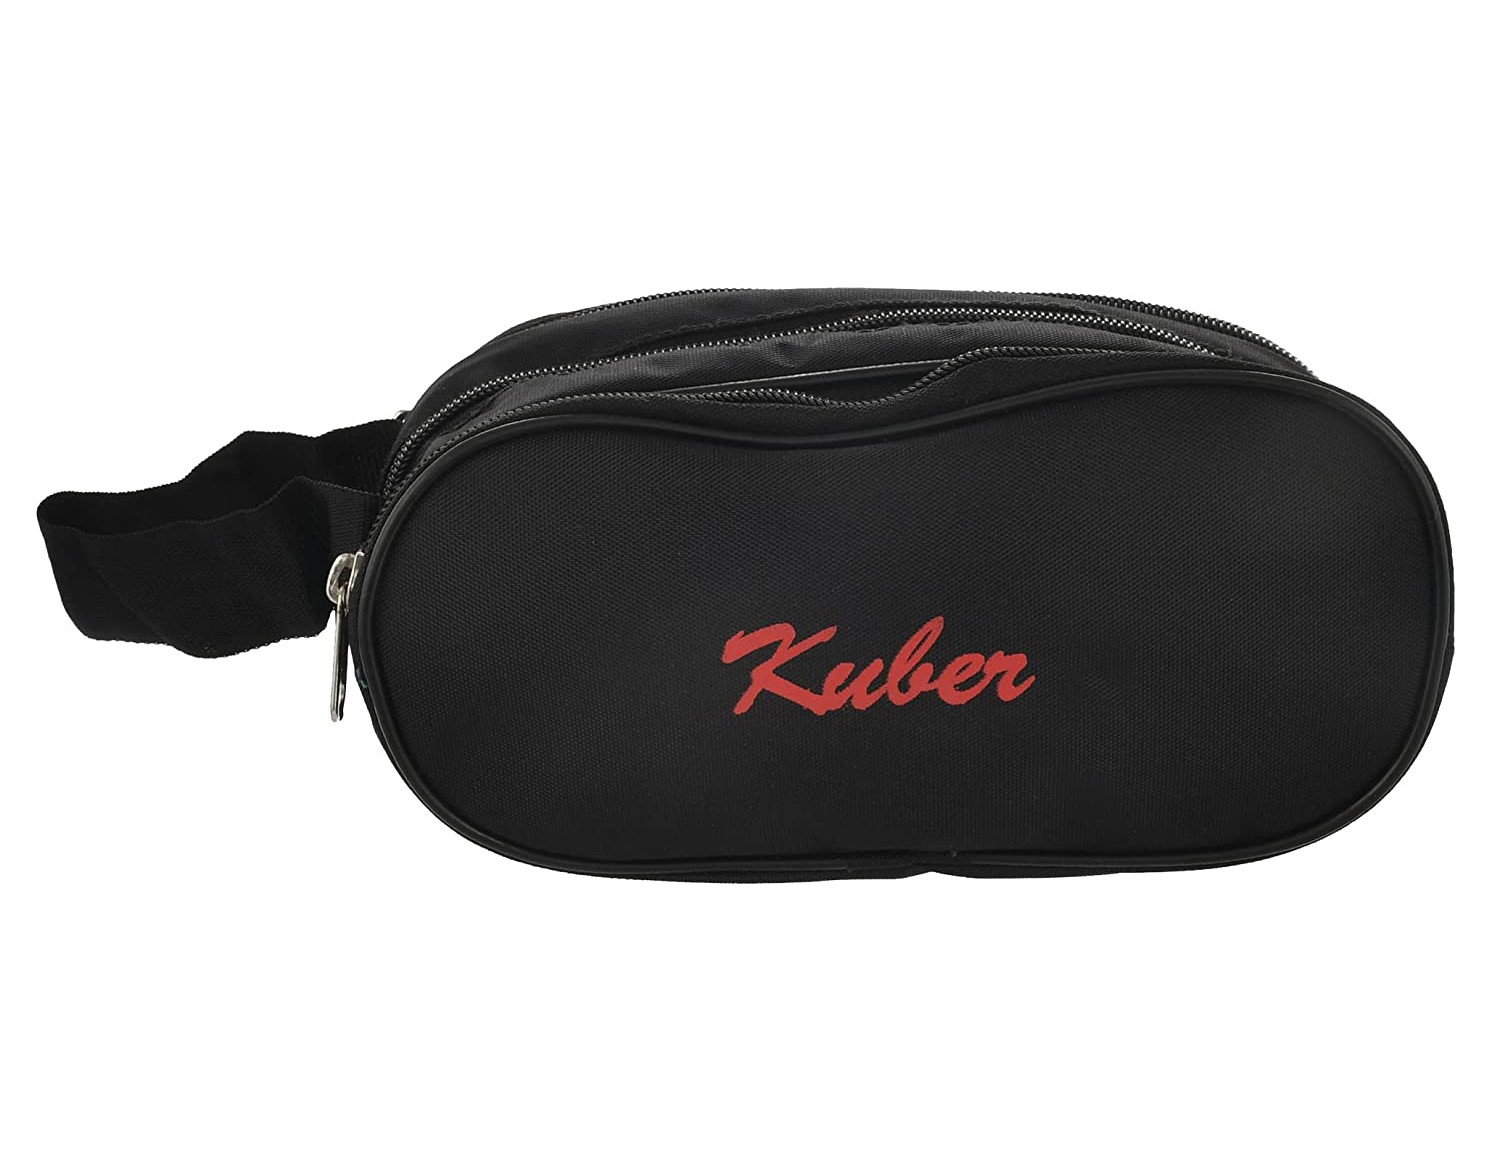 Kuber Industries Rexine Lightweight Travel Toiletry Bag Shaving Kit With Carrying Strap (Black) 54KM4281